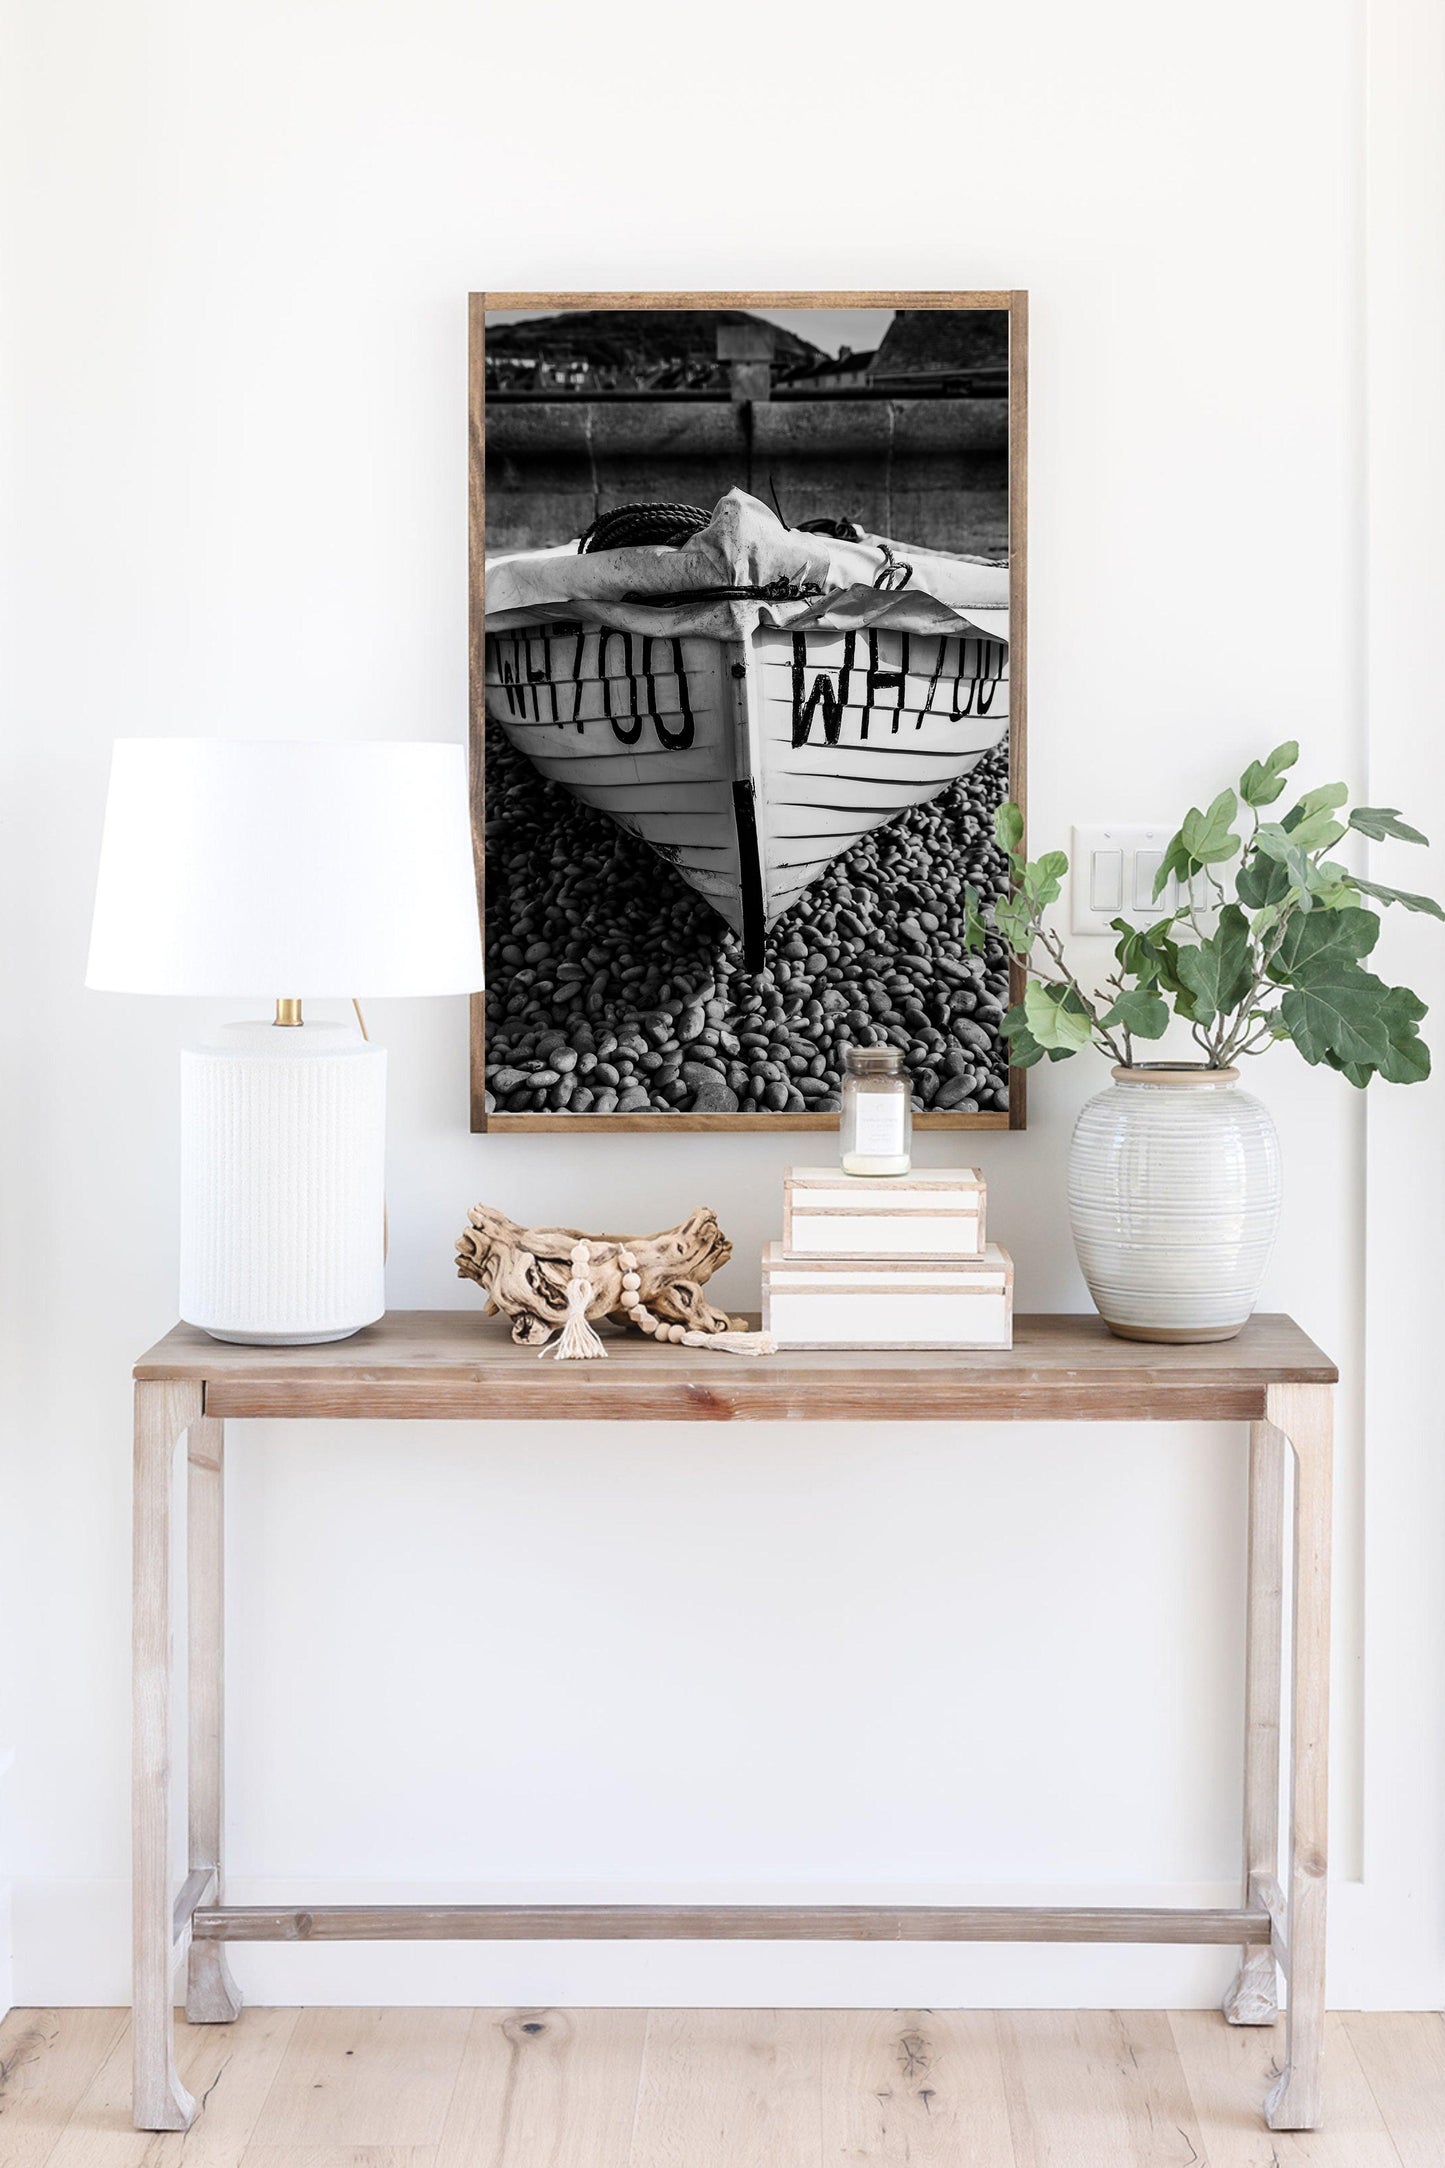 Black and White Wooden Boat Photography II | Beach Photography Print - Departures Print Shop